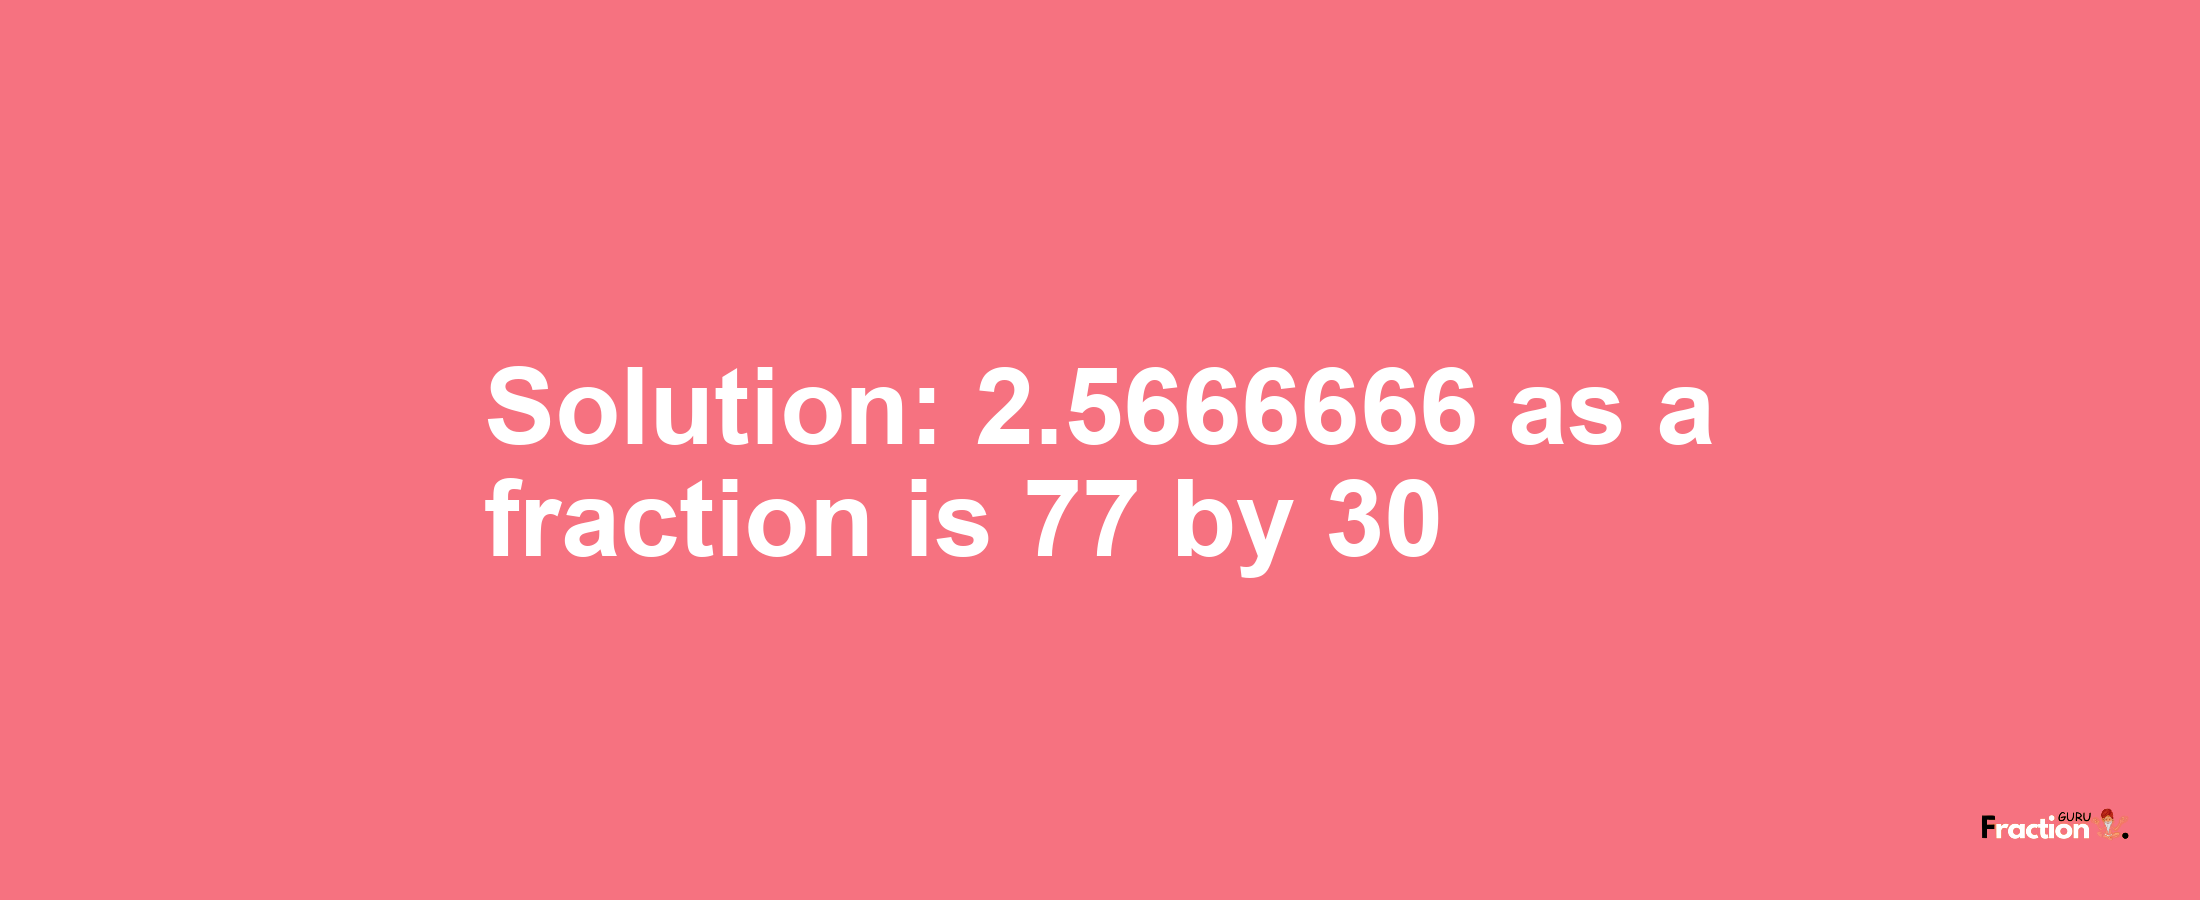 Solution:2.5666666 as a fraction is 77/30